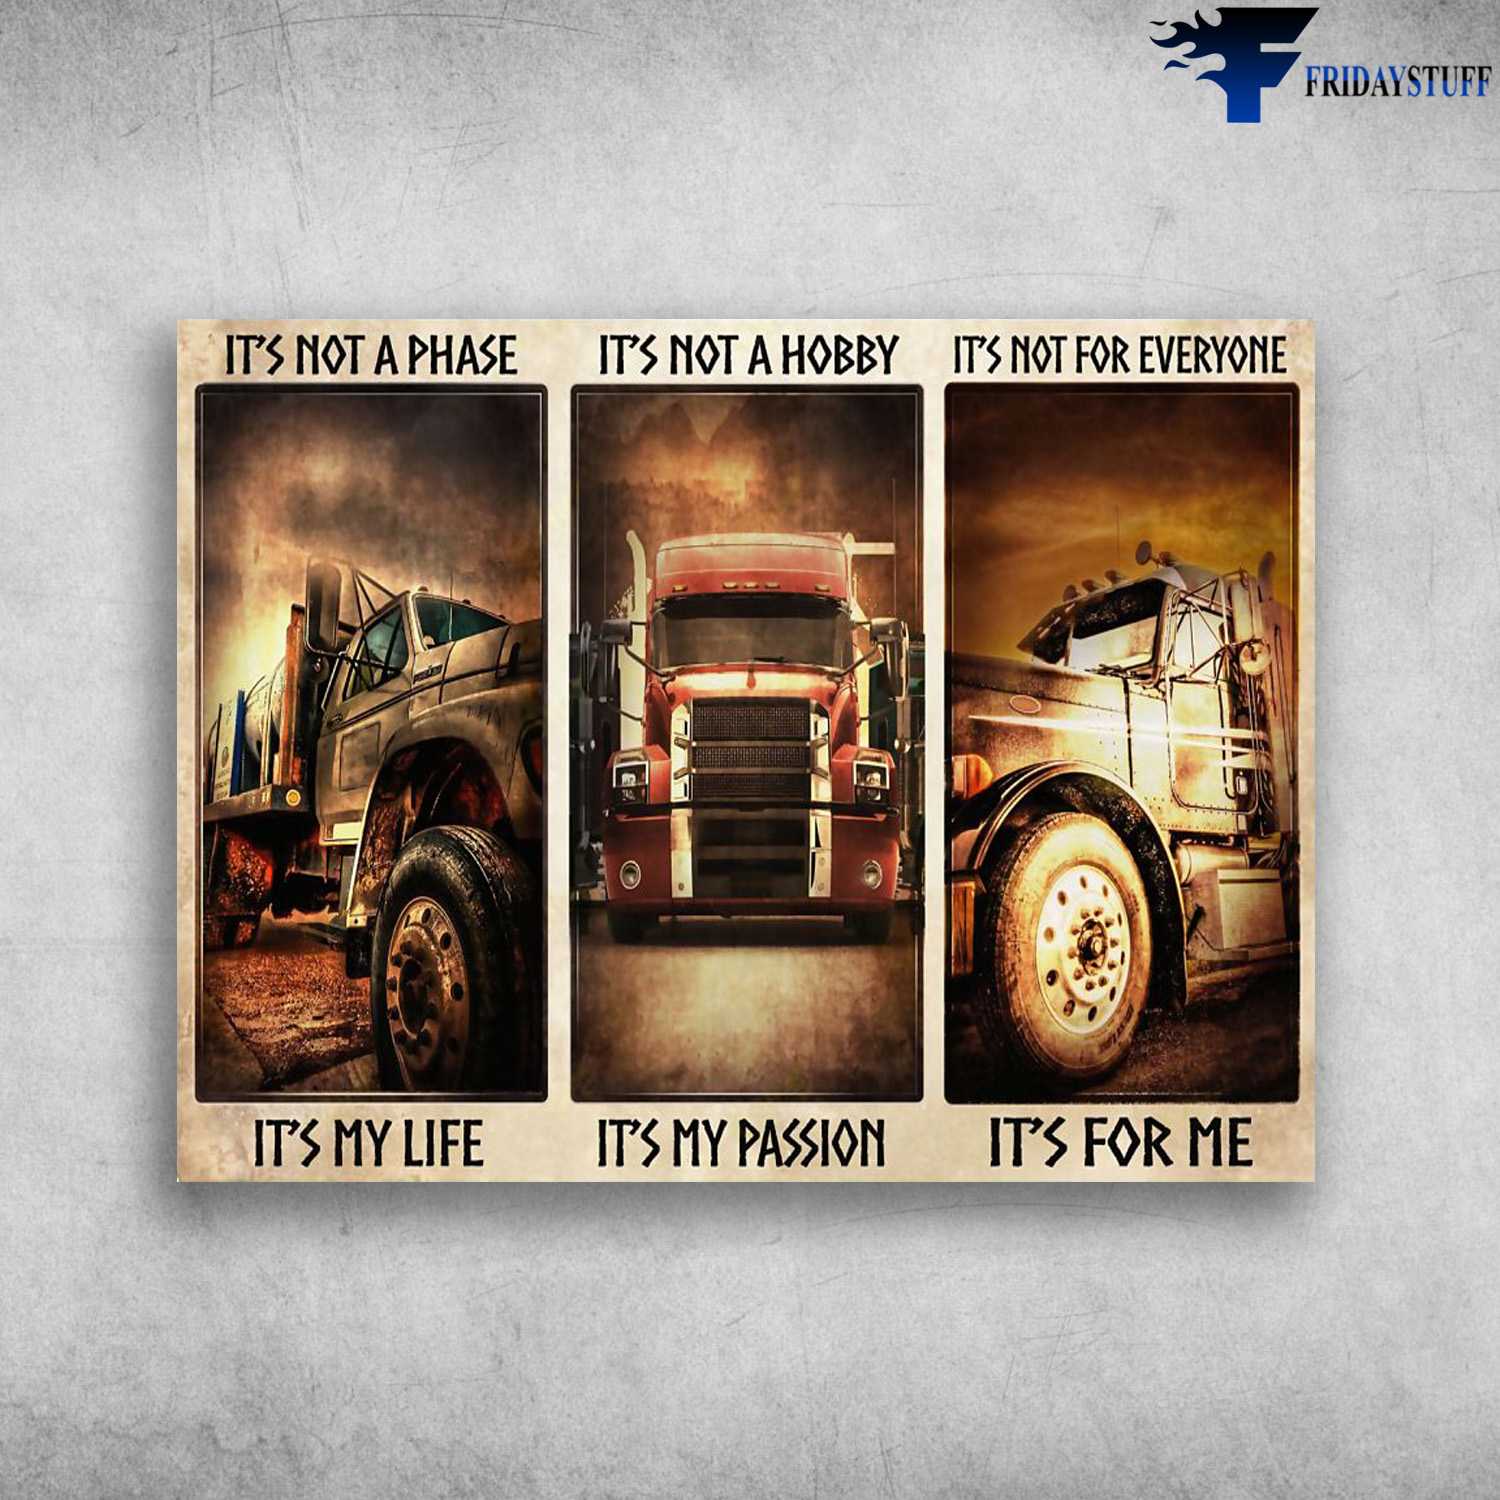 Trucker Poster, It’s Not A Phase, It’s My Life, It’s Not A Hobby, It’s My Passion, It’s Not For Everyone, It’s For Me